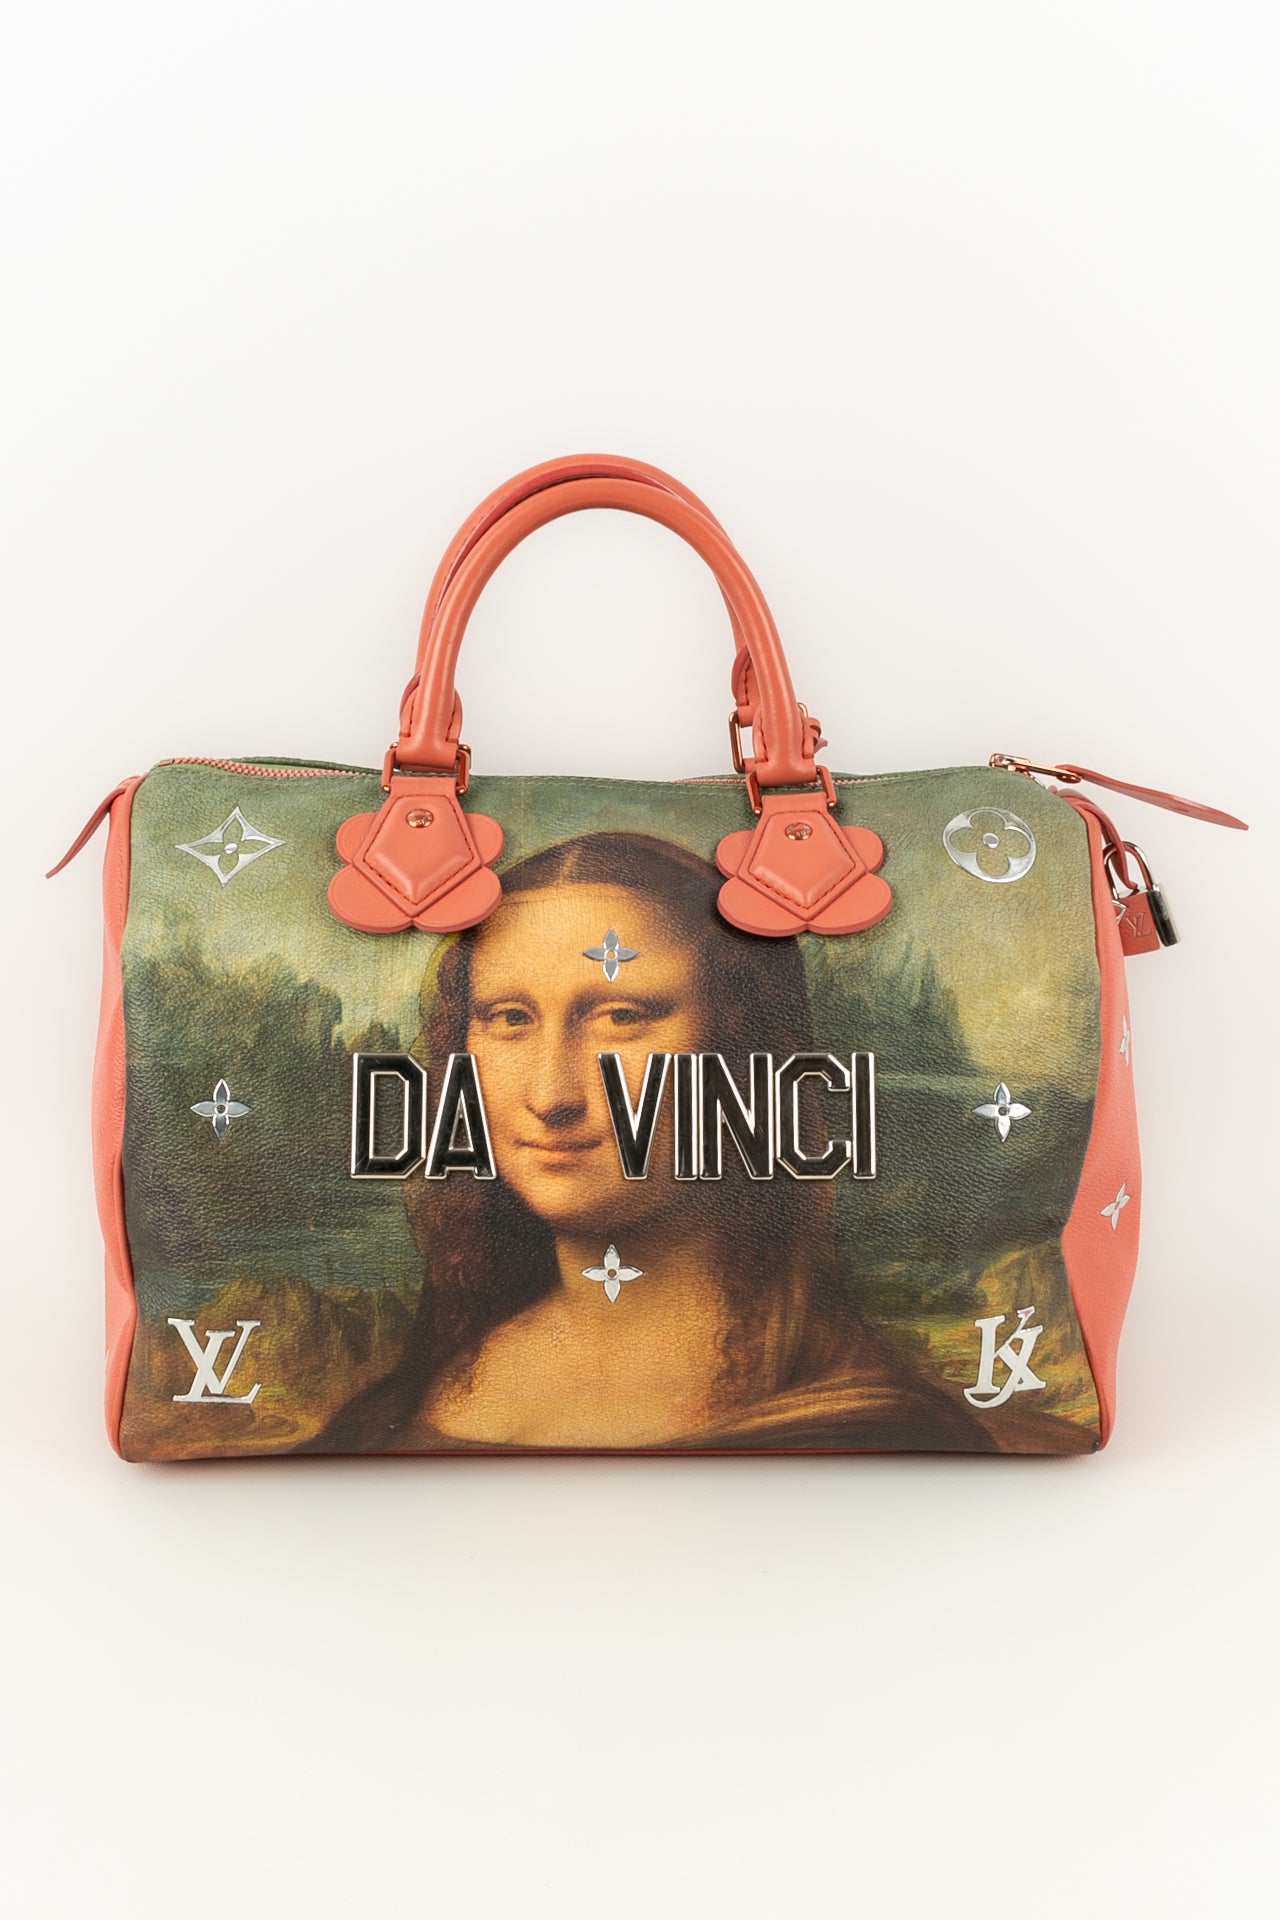 Wear your art on your bag Louis Vuitton unveils its latest Jeff Koons  collection featuring Monet Gauguin and Turner